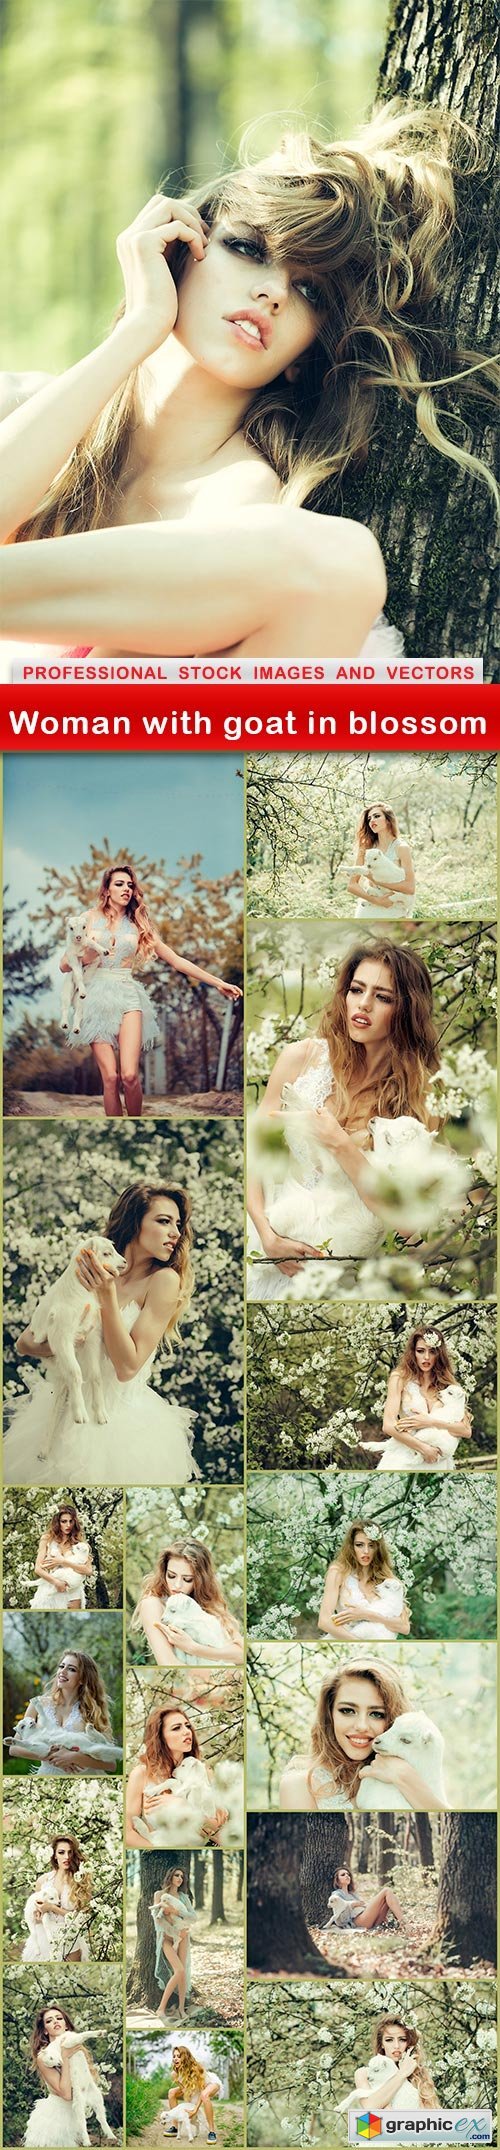 Woman with goat in blossom - 18 UHQ JPEG